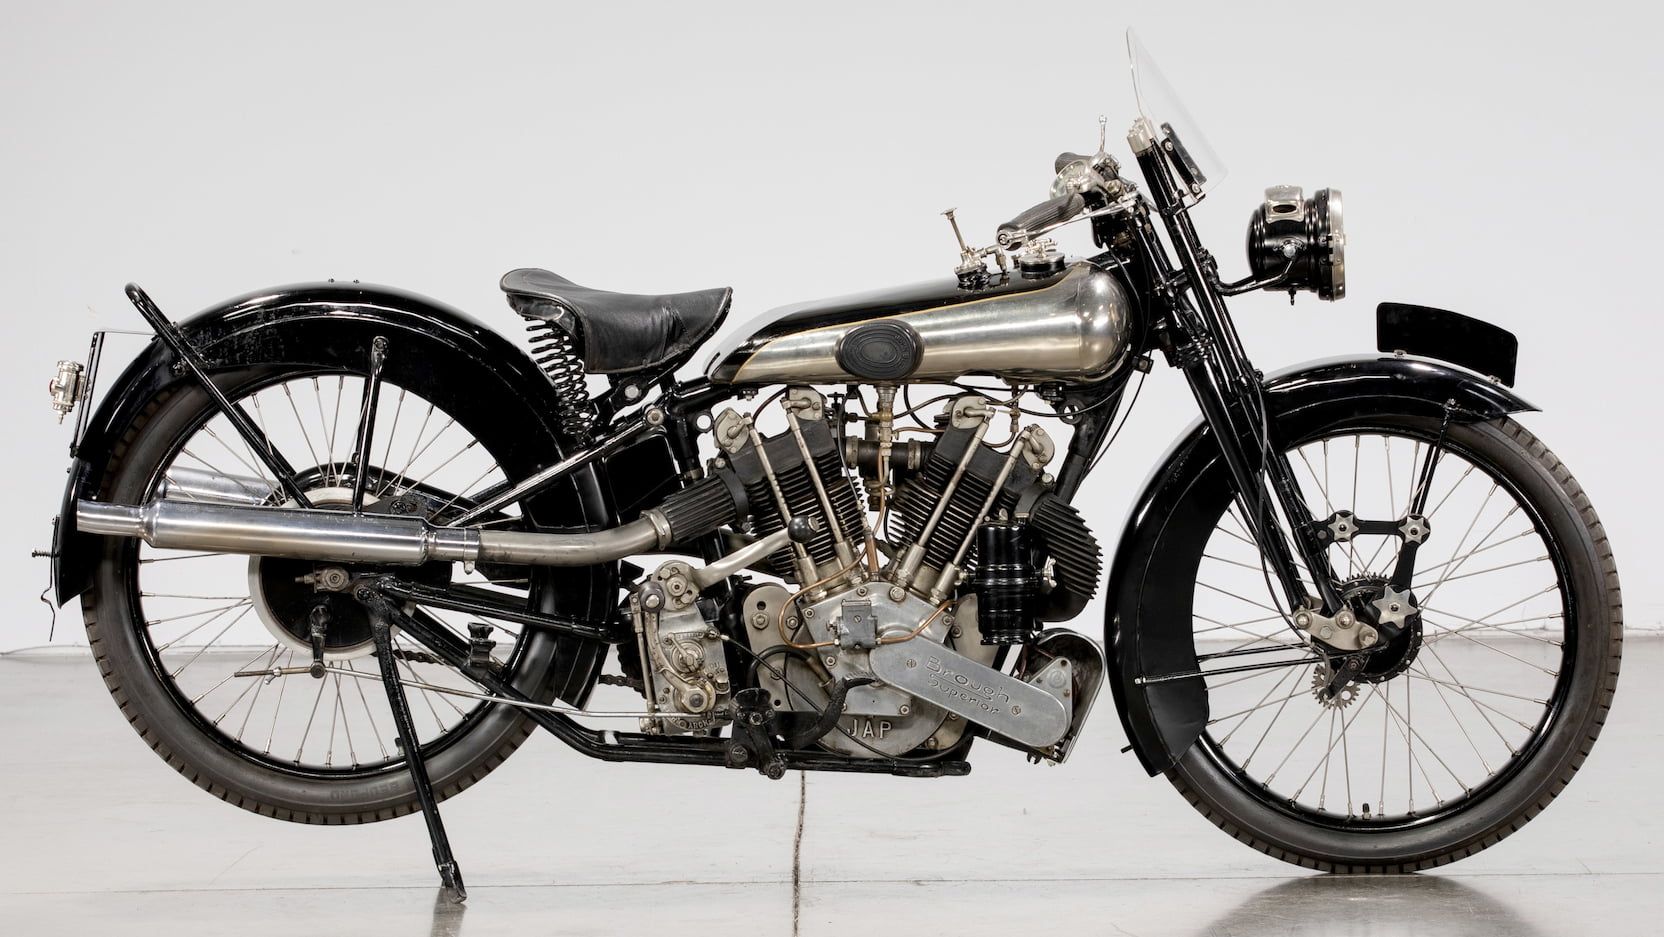 1925 Brough Superior SS100 with kickstand down